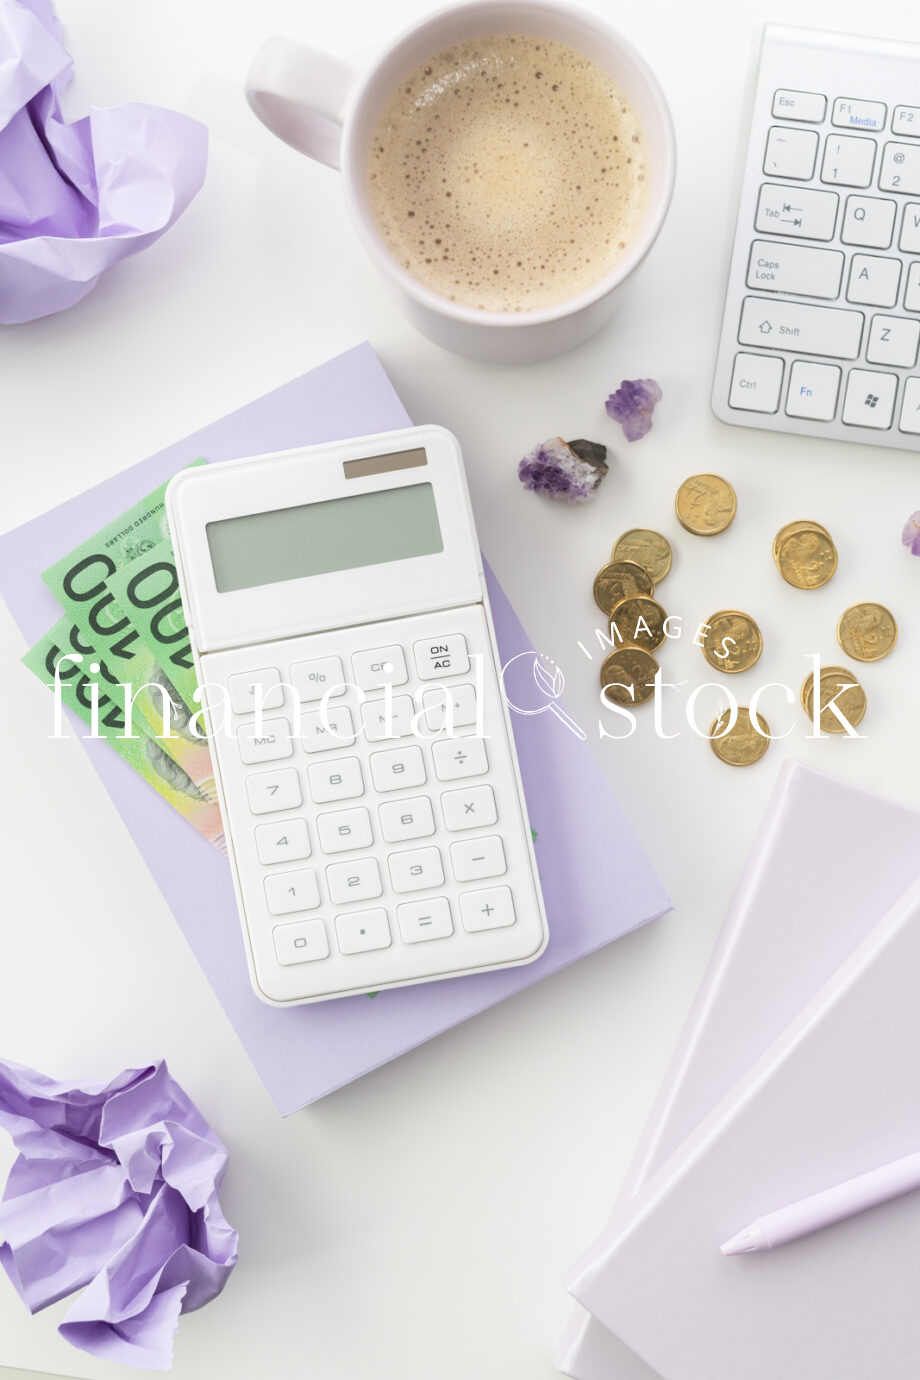 Lilac Financial Stock Images